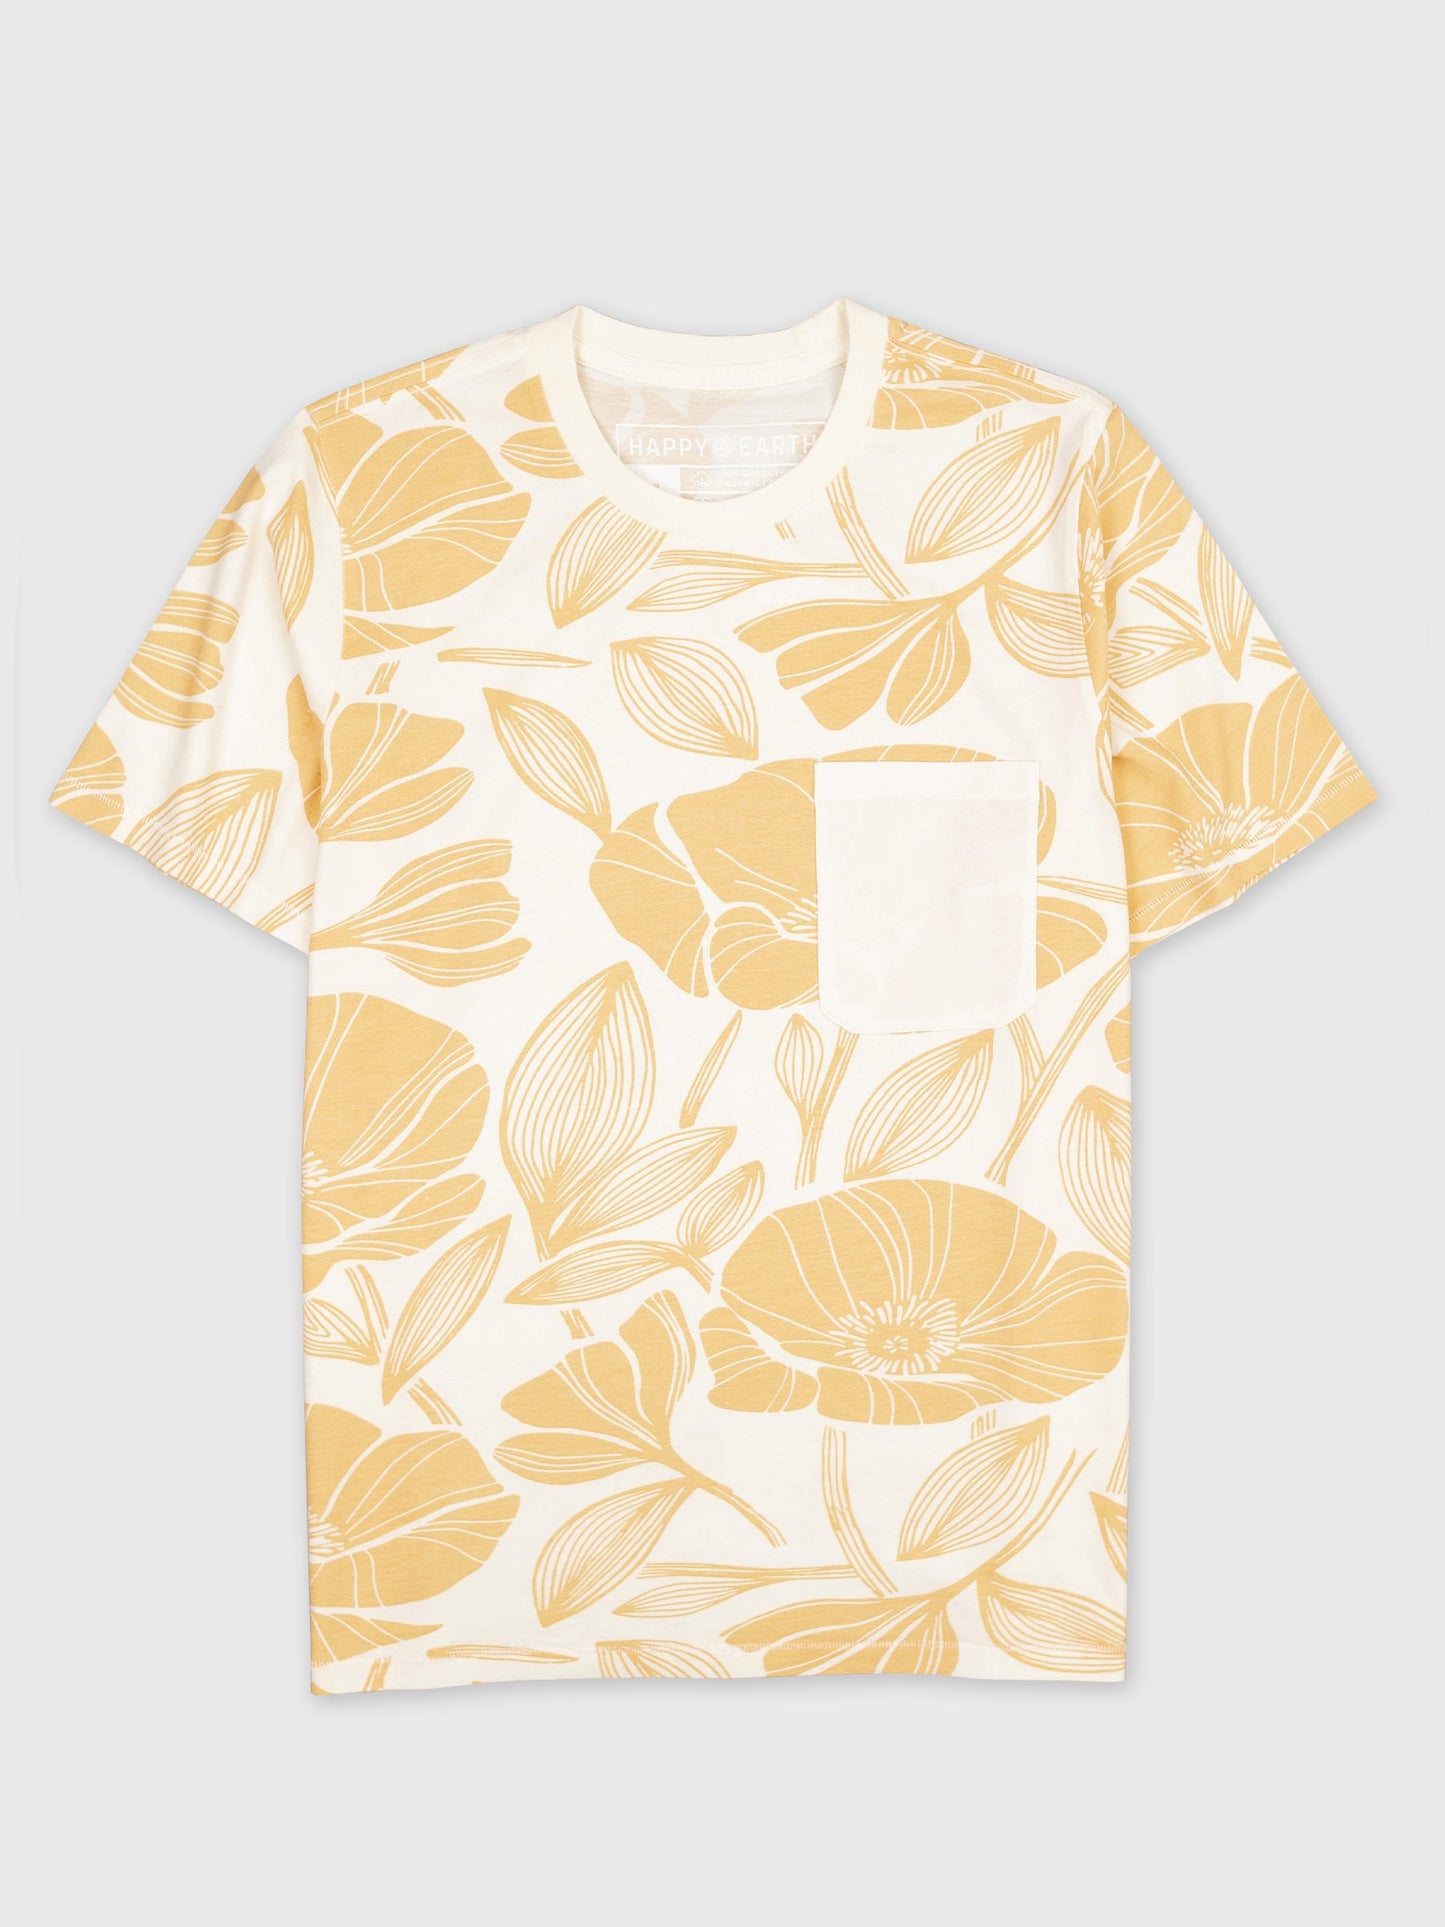 Golden Poppies Pocket Tee by Happy Earth